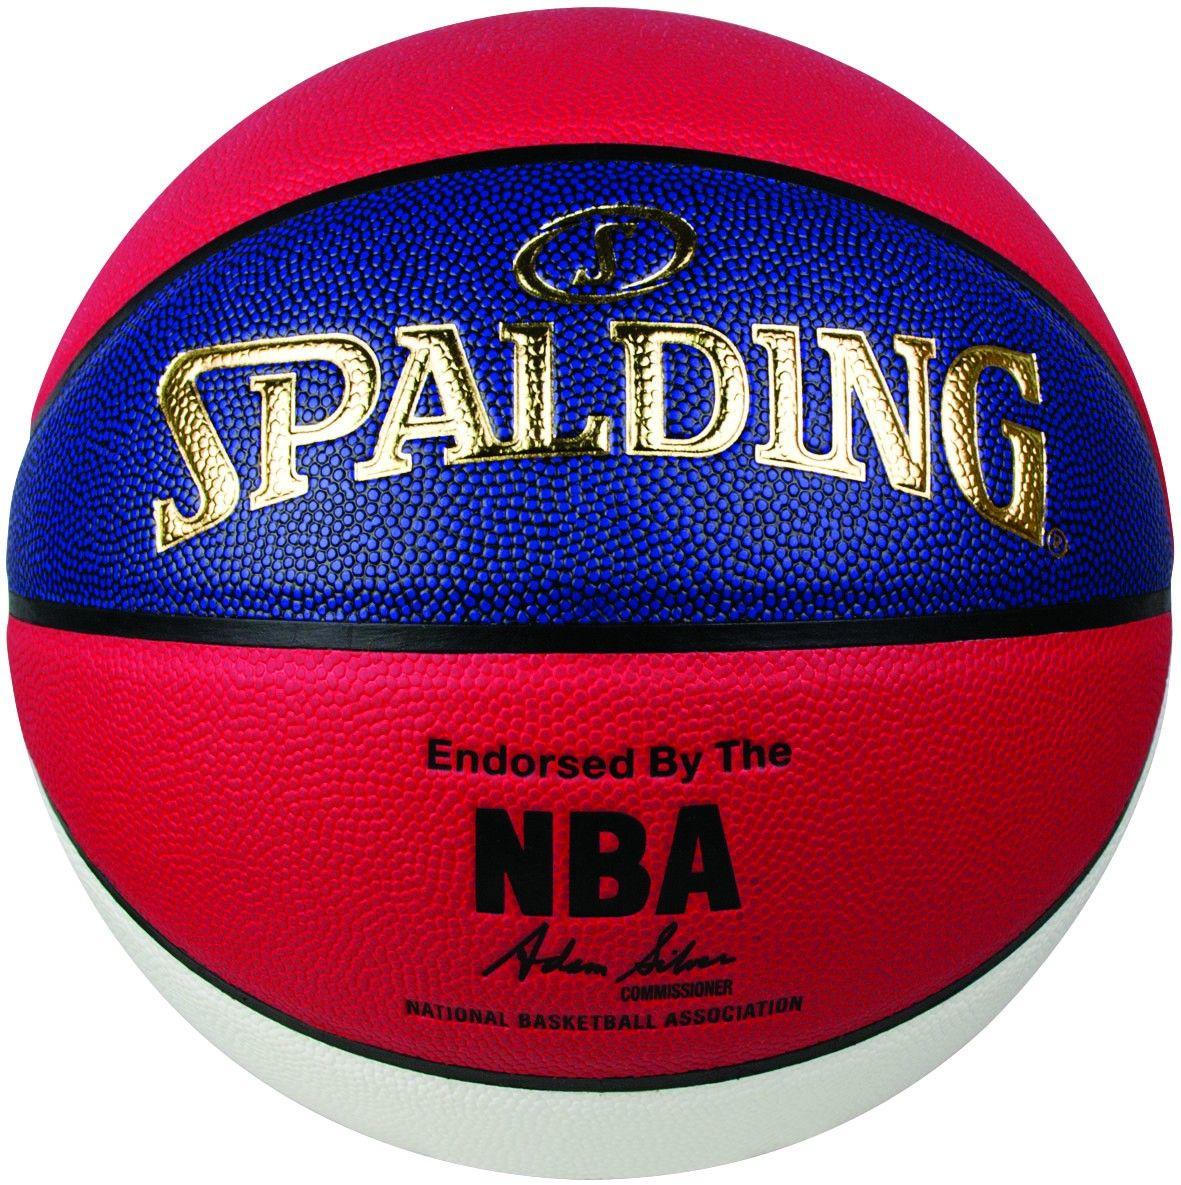 Red and Blue Ball Logo - NBA Logoman - Red/White/Blue - Size 7